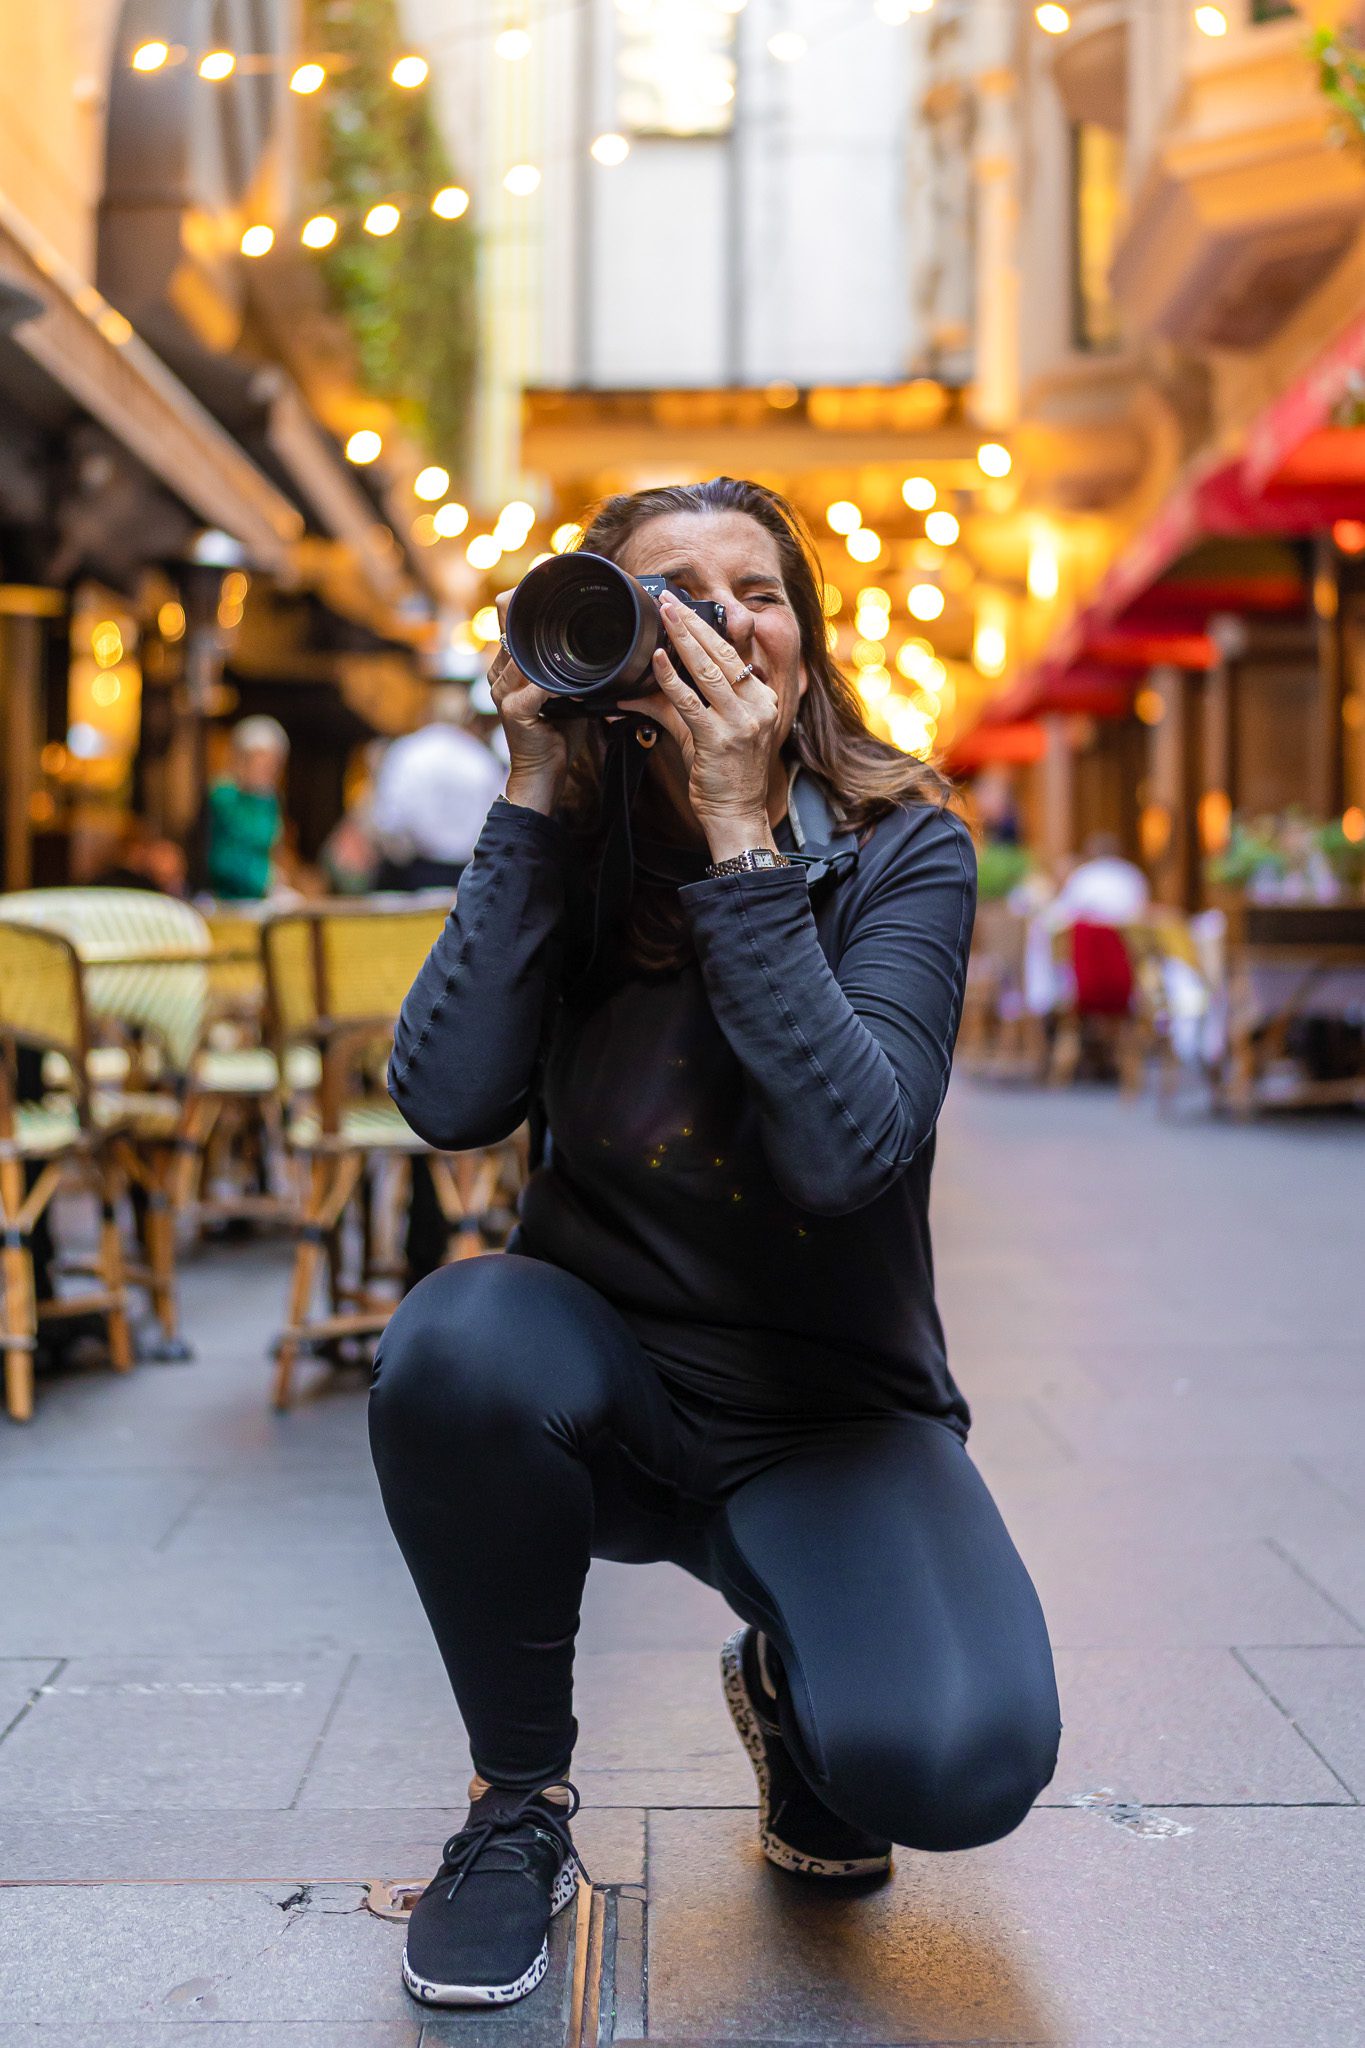 Photographer wearing black and crouching down to take a street scene with bright lights